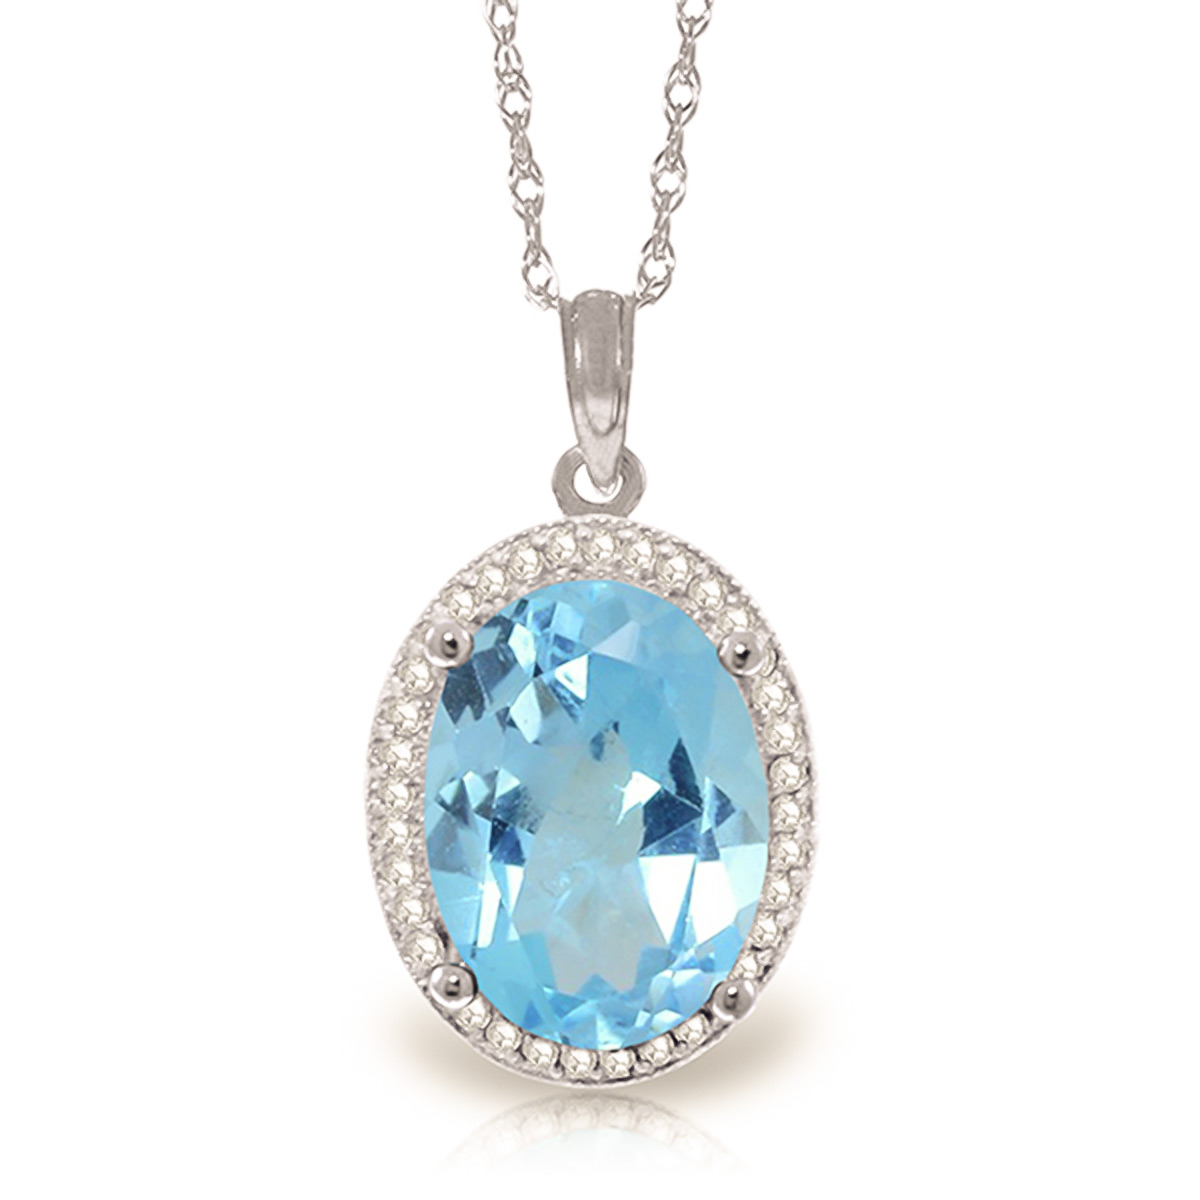 Blue Topaz Halo Pendant Necklace 7.58 ctw in 9ct White Gold